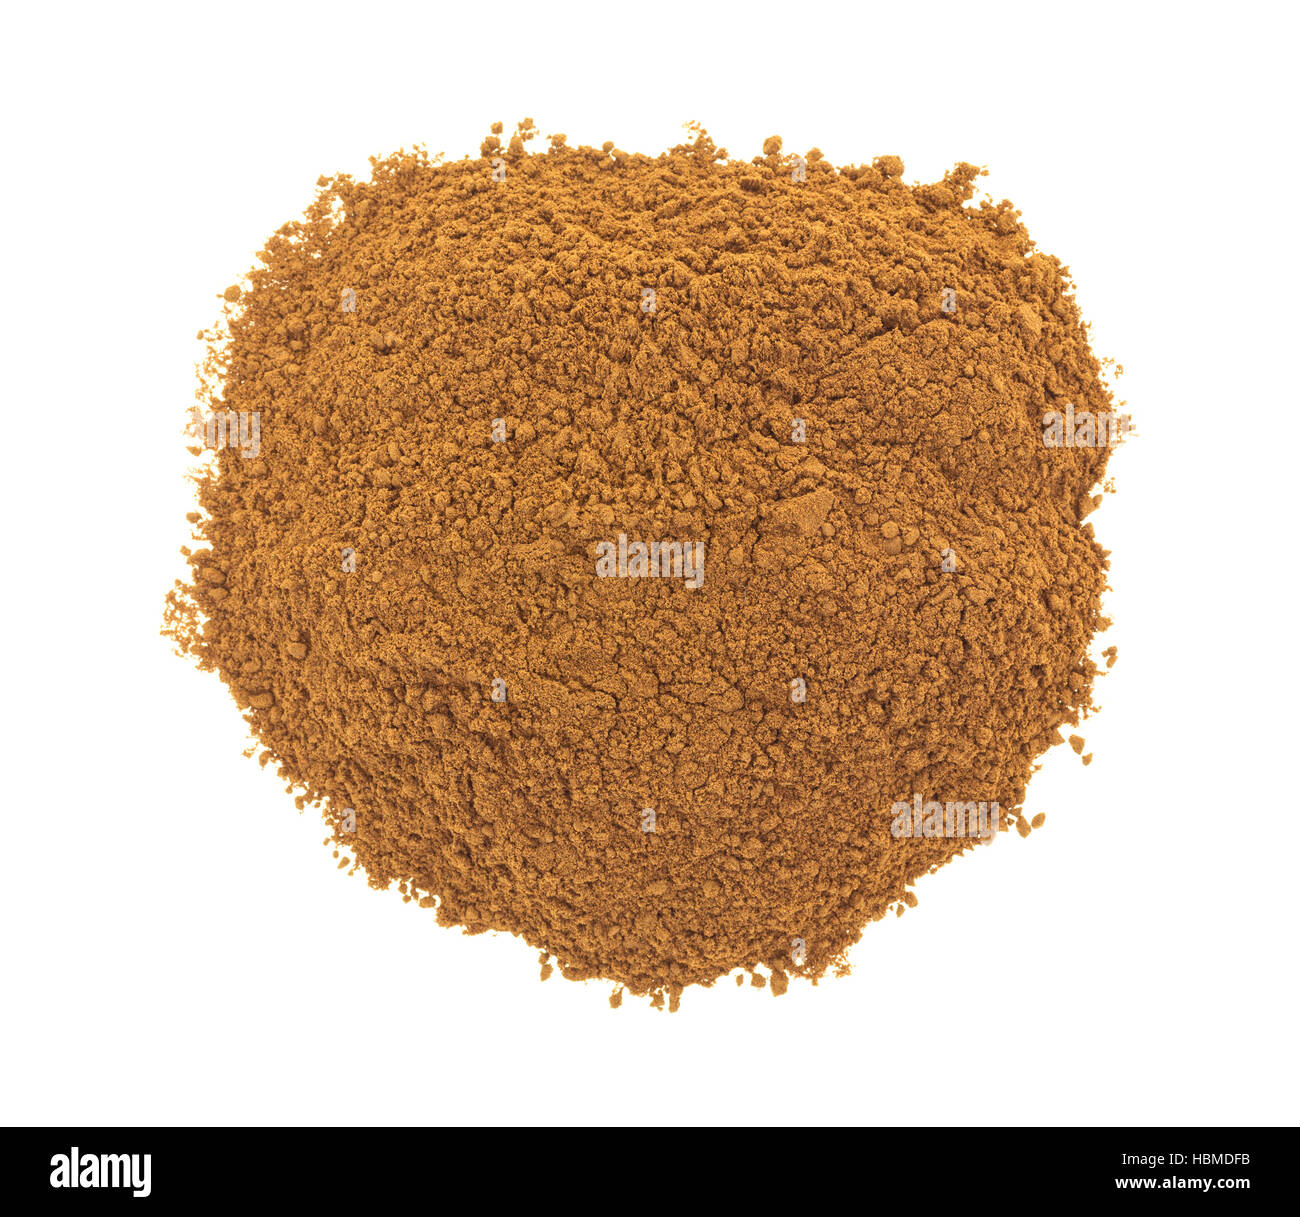 Top view of a small serving of carob powder isolated on a white background. Stock Photo